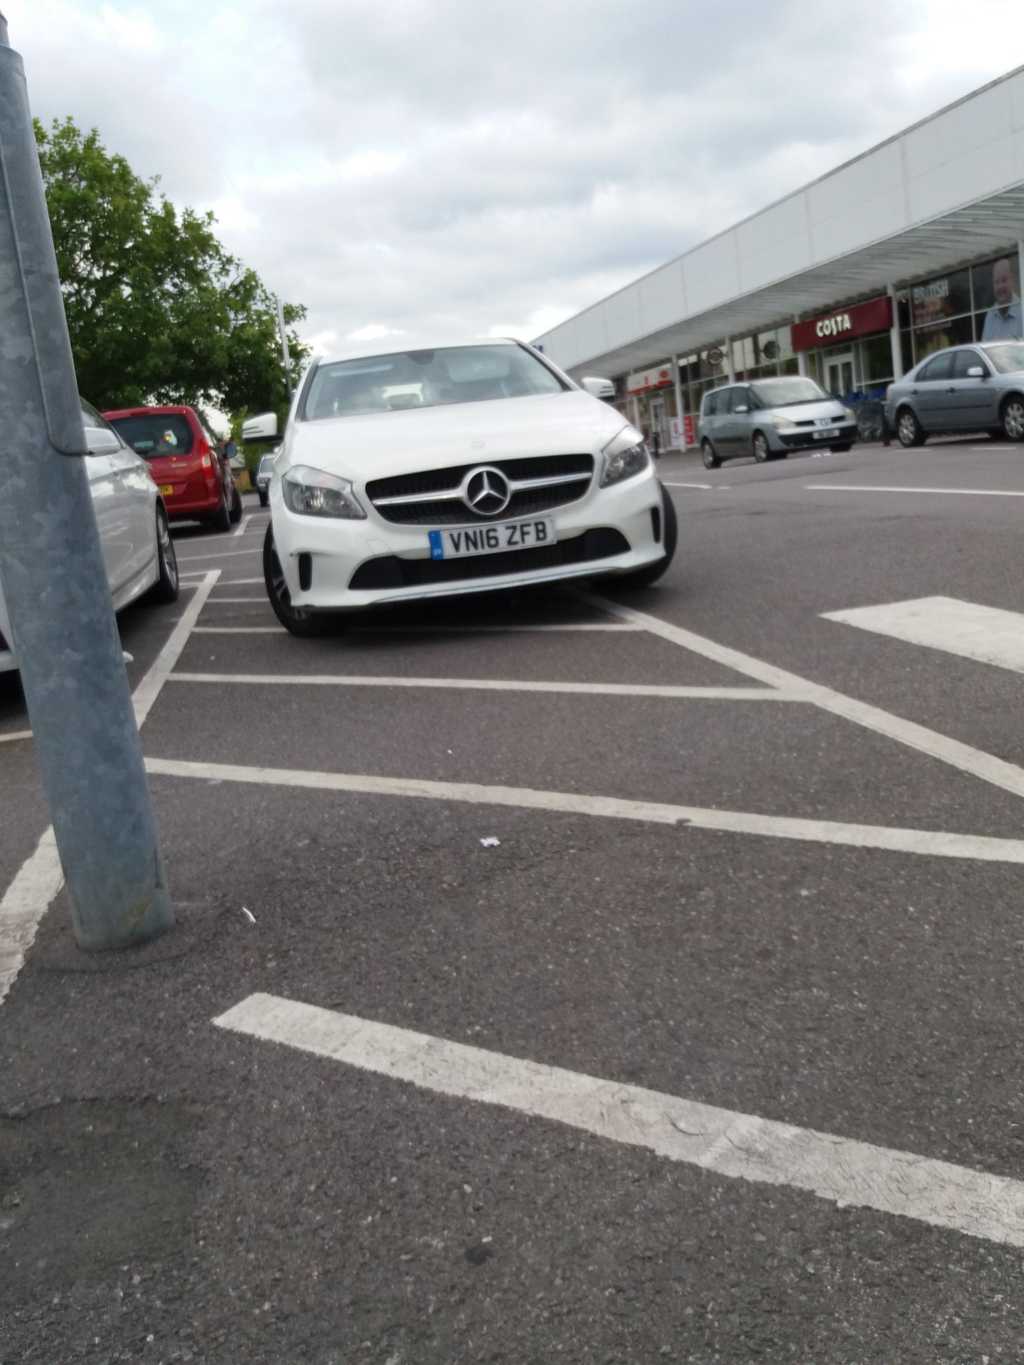 VN16 ZFB displaying Inconsiderate Parking